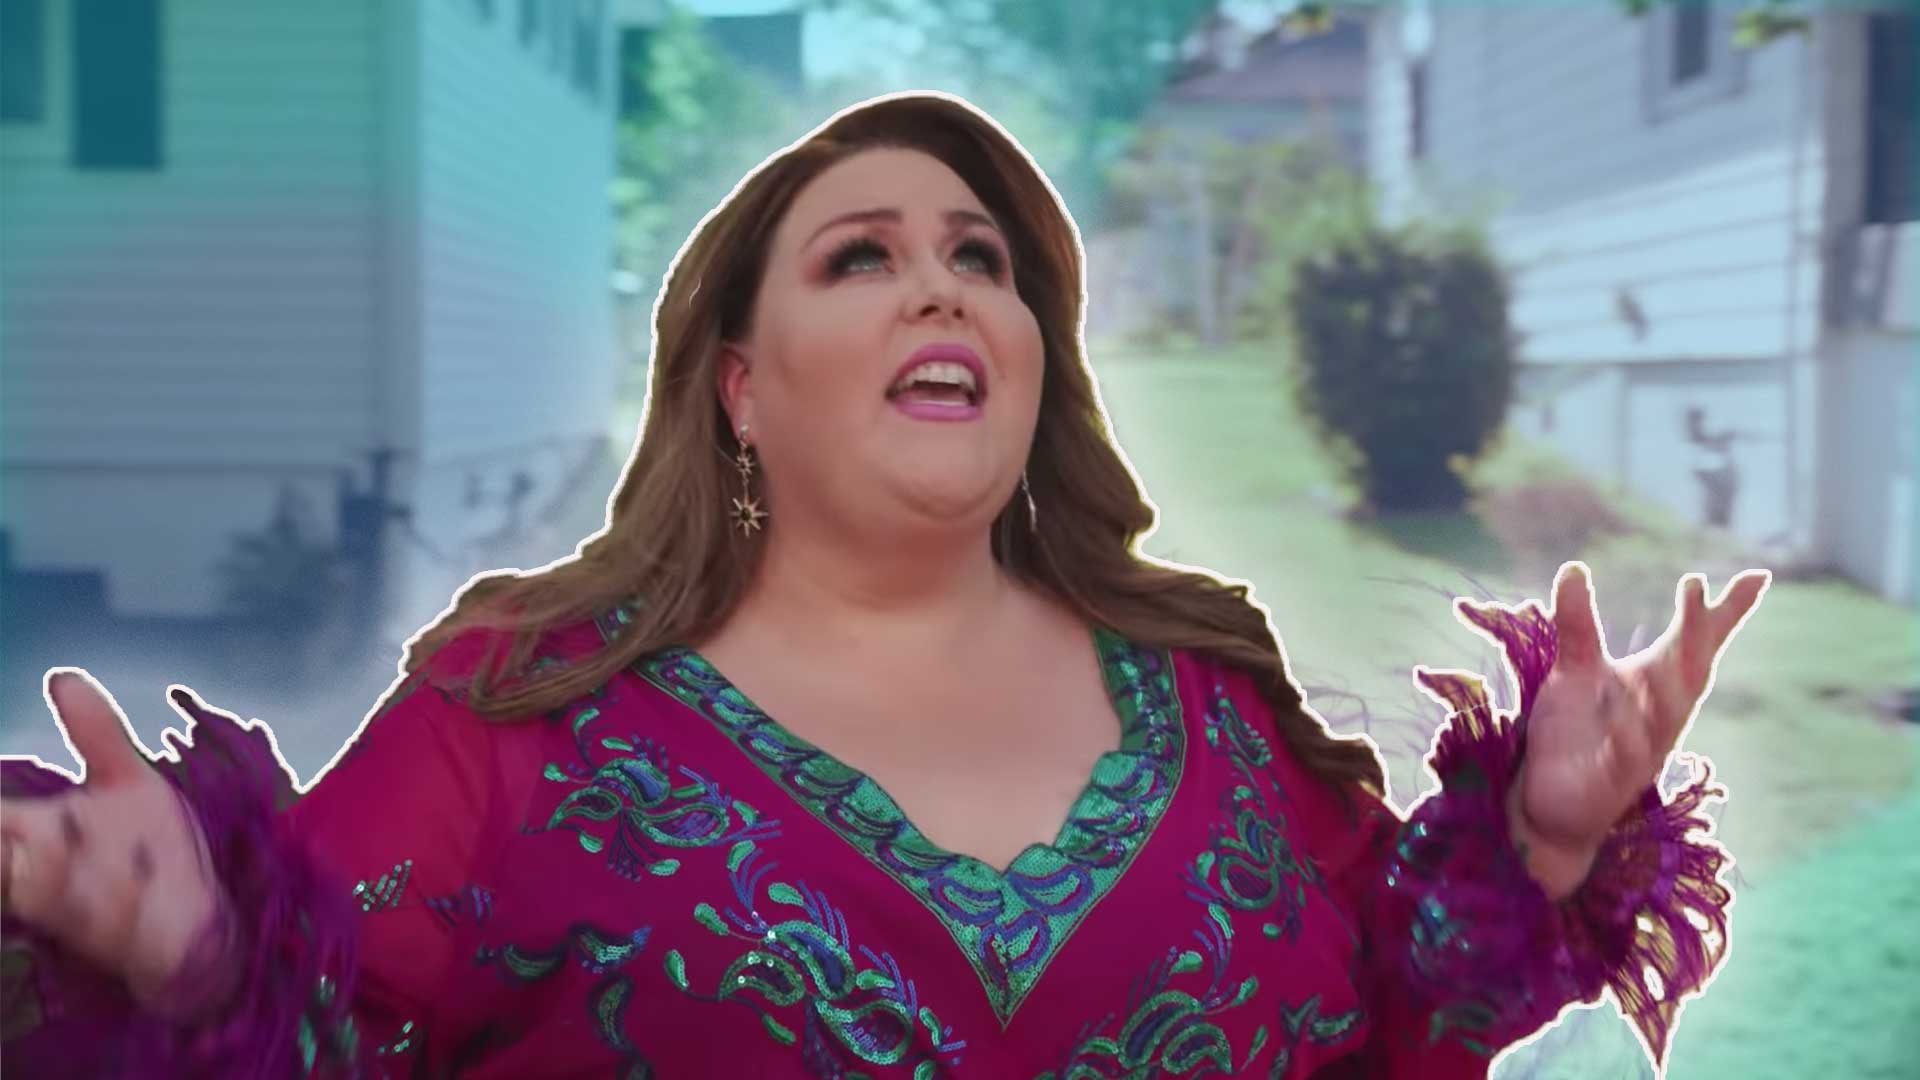 Chrissy Metz from This is Us Stars in the music video for her song "Talking to God"